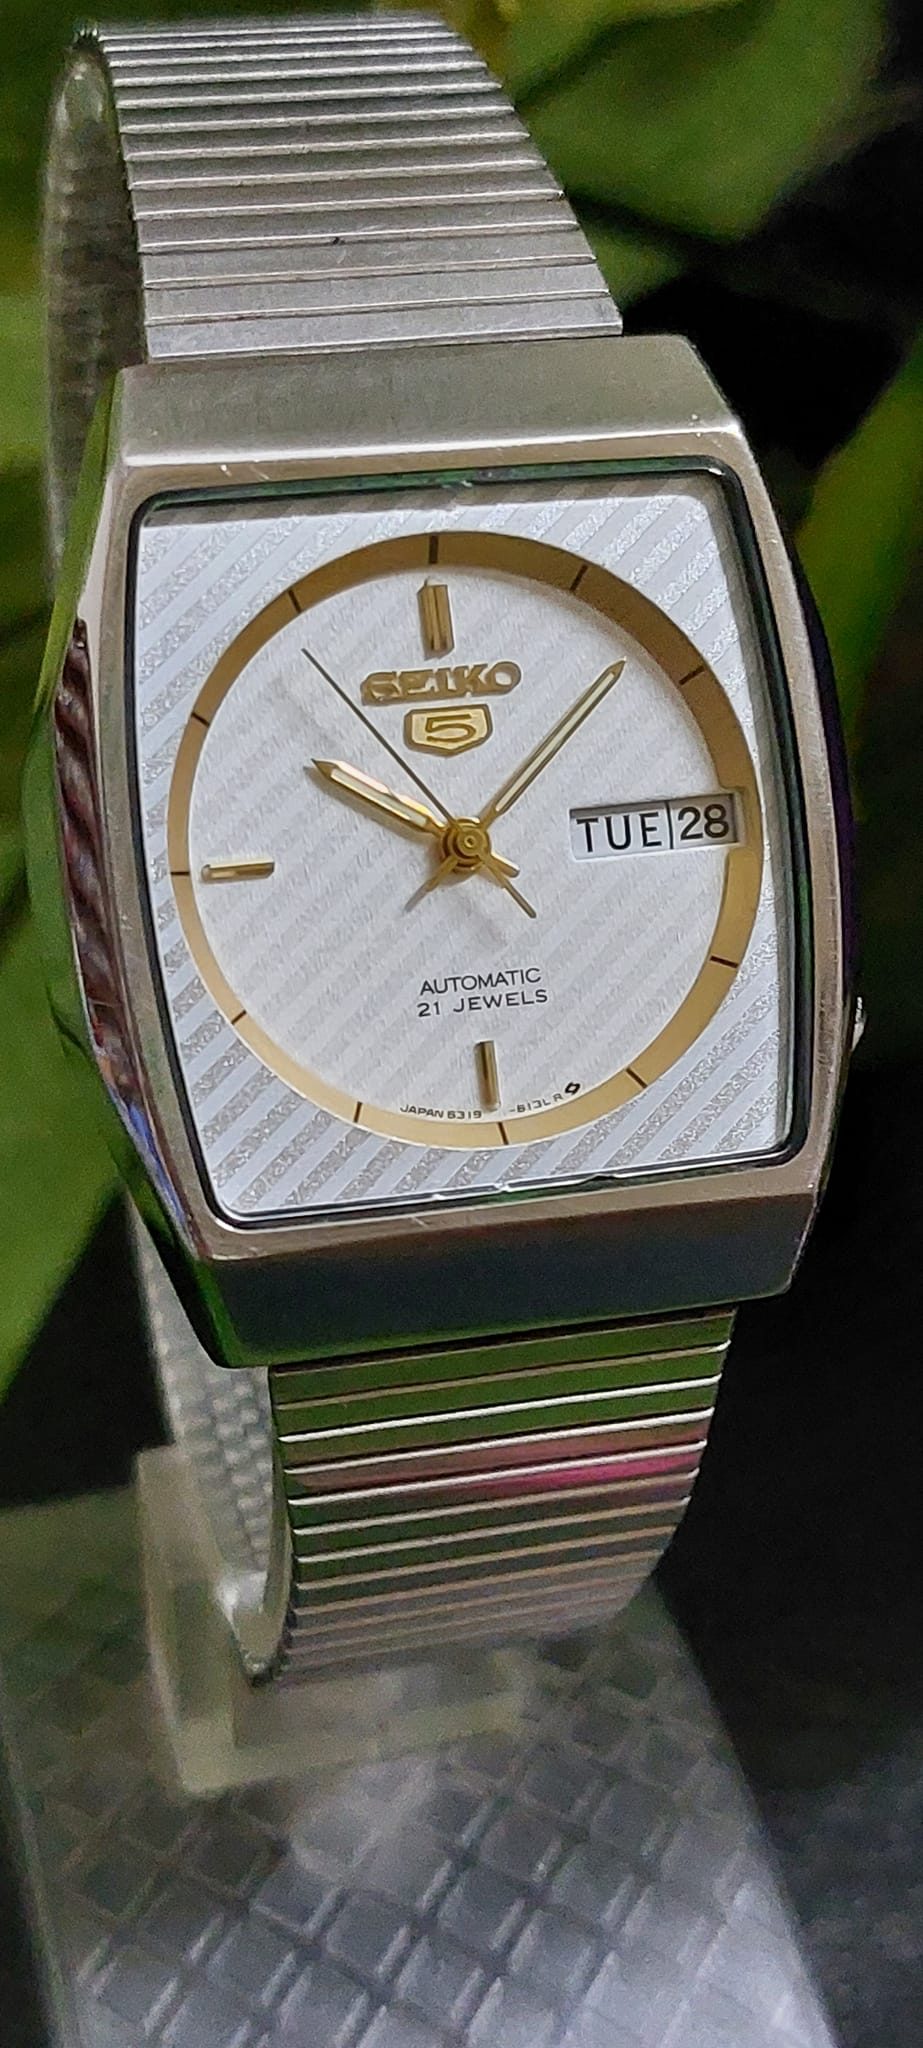 Rare and Vintage Seiko 6319 white dial Japan made Automatic watch for Men